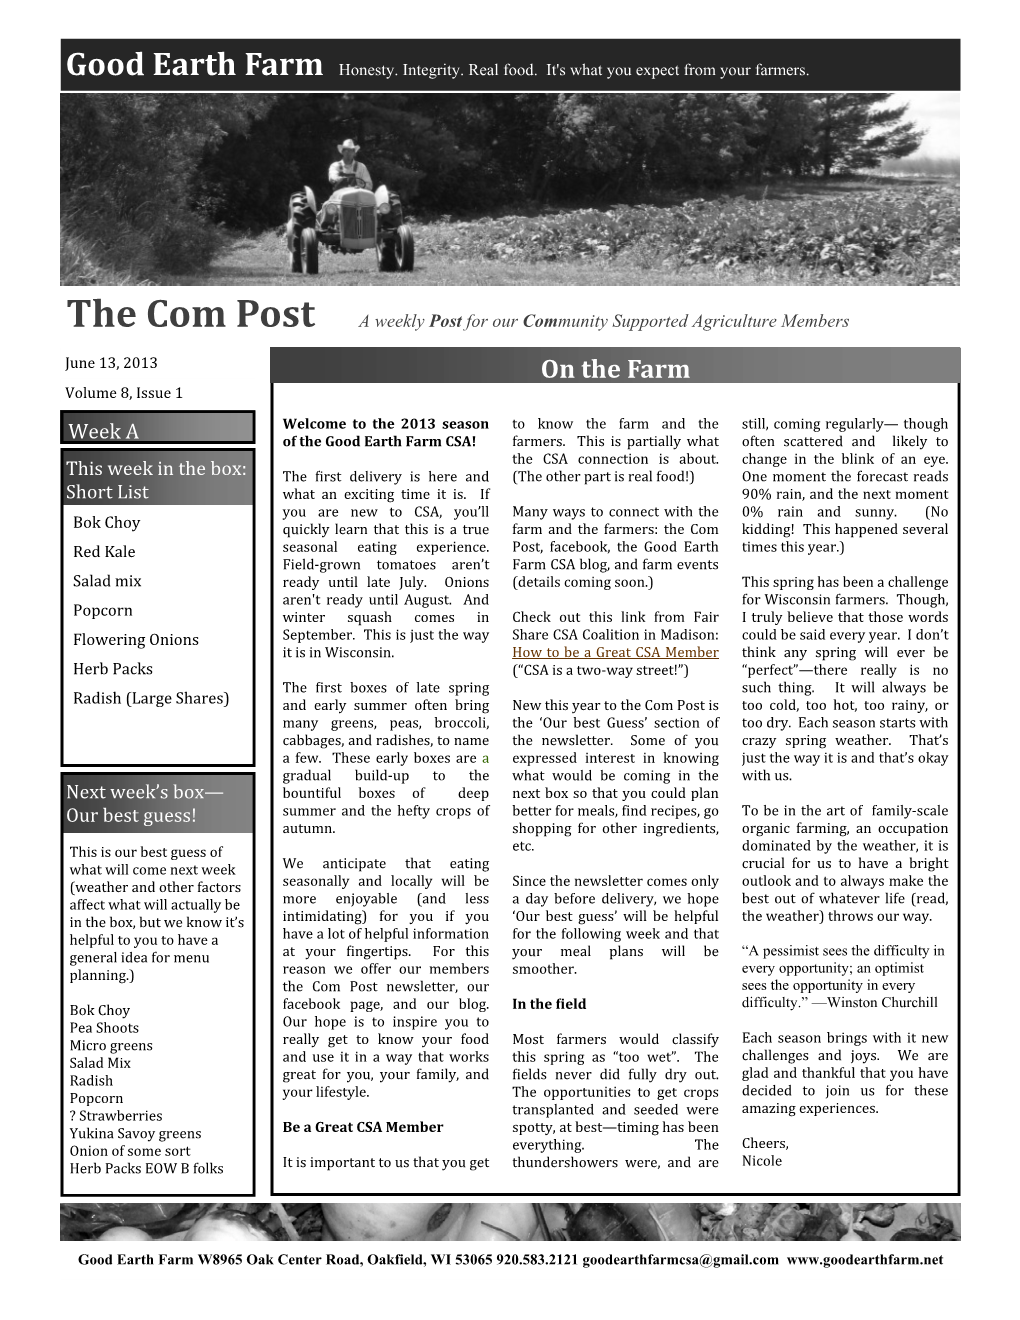 On the Farm Volume 8, Issue 1